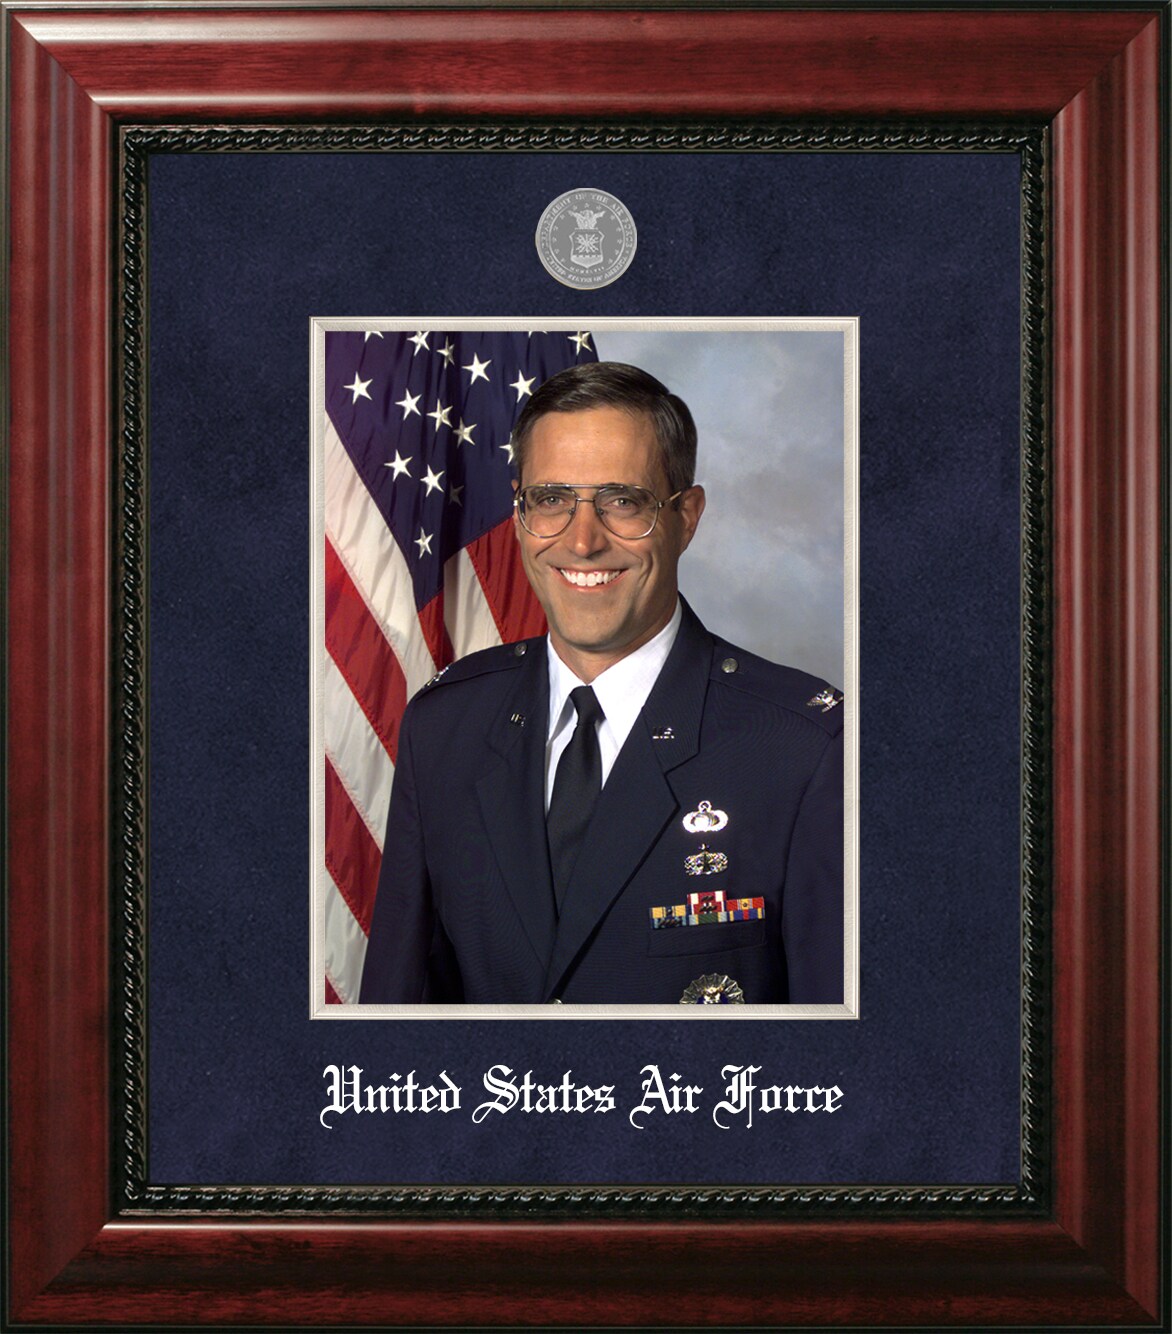 Patriot Frames Air Force 8x10 Portrait Executive Frame with Silver Medallion